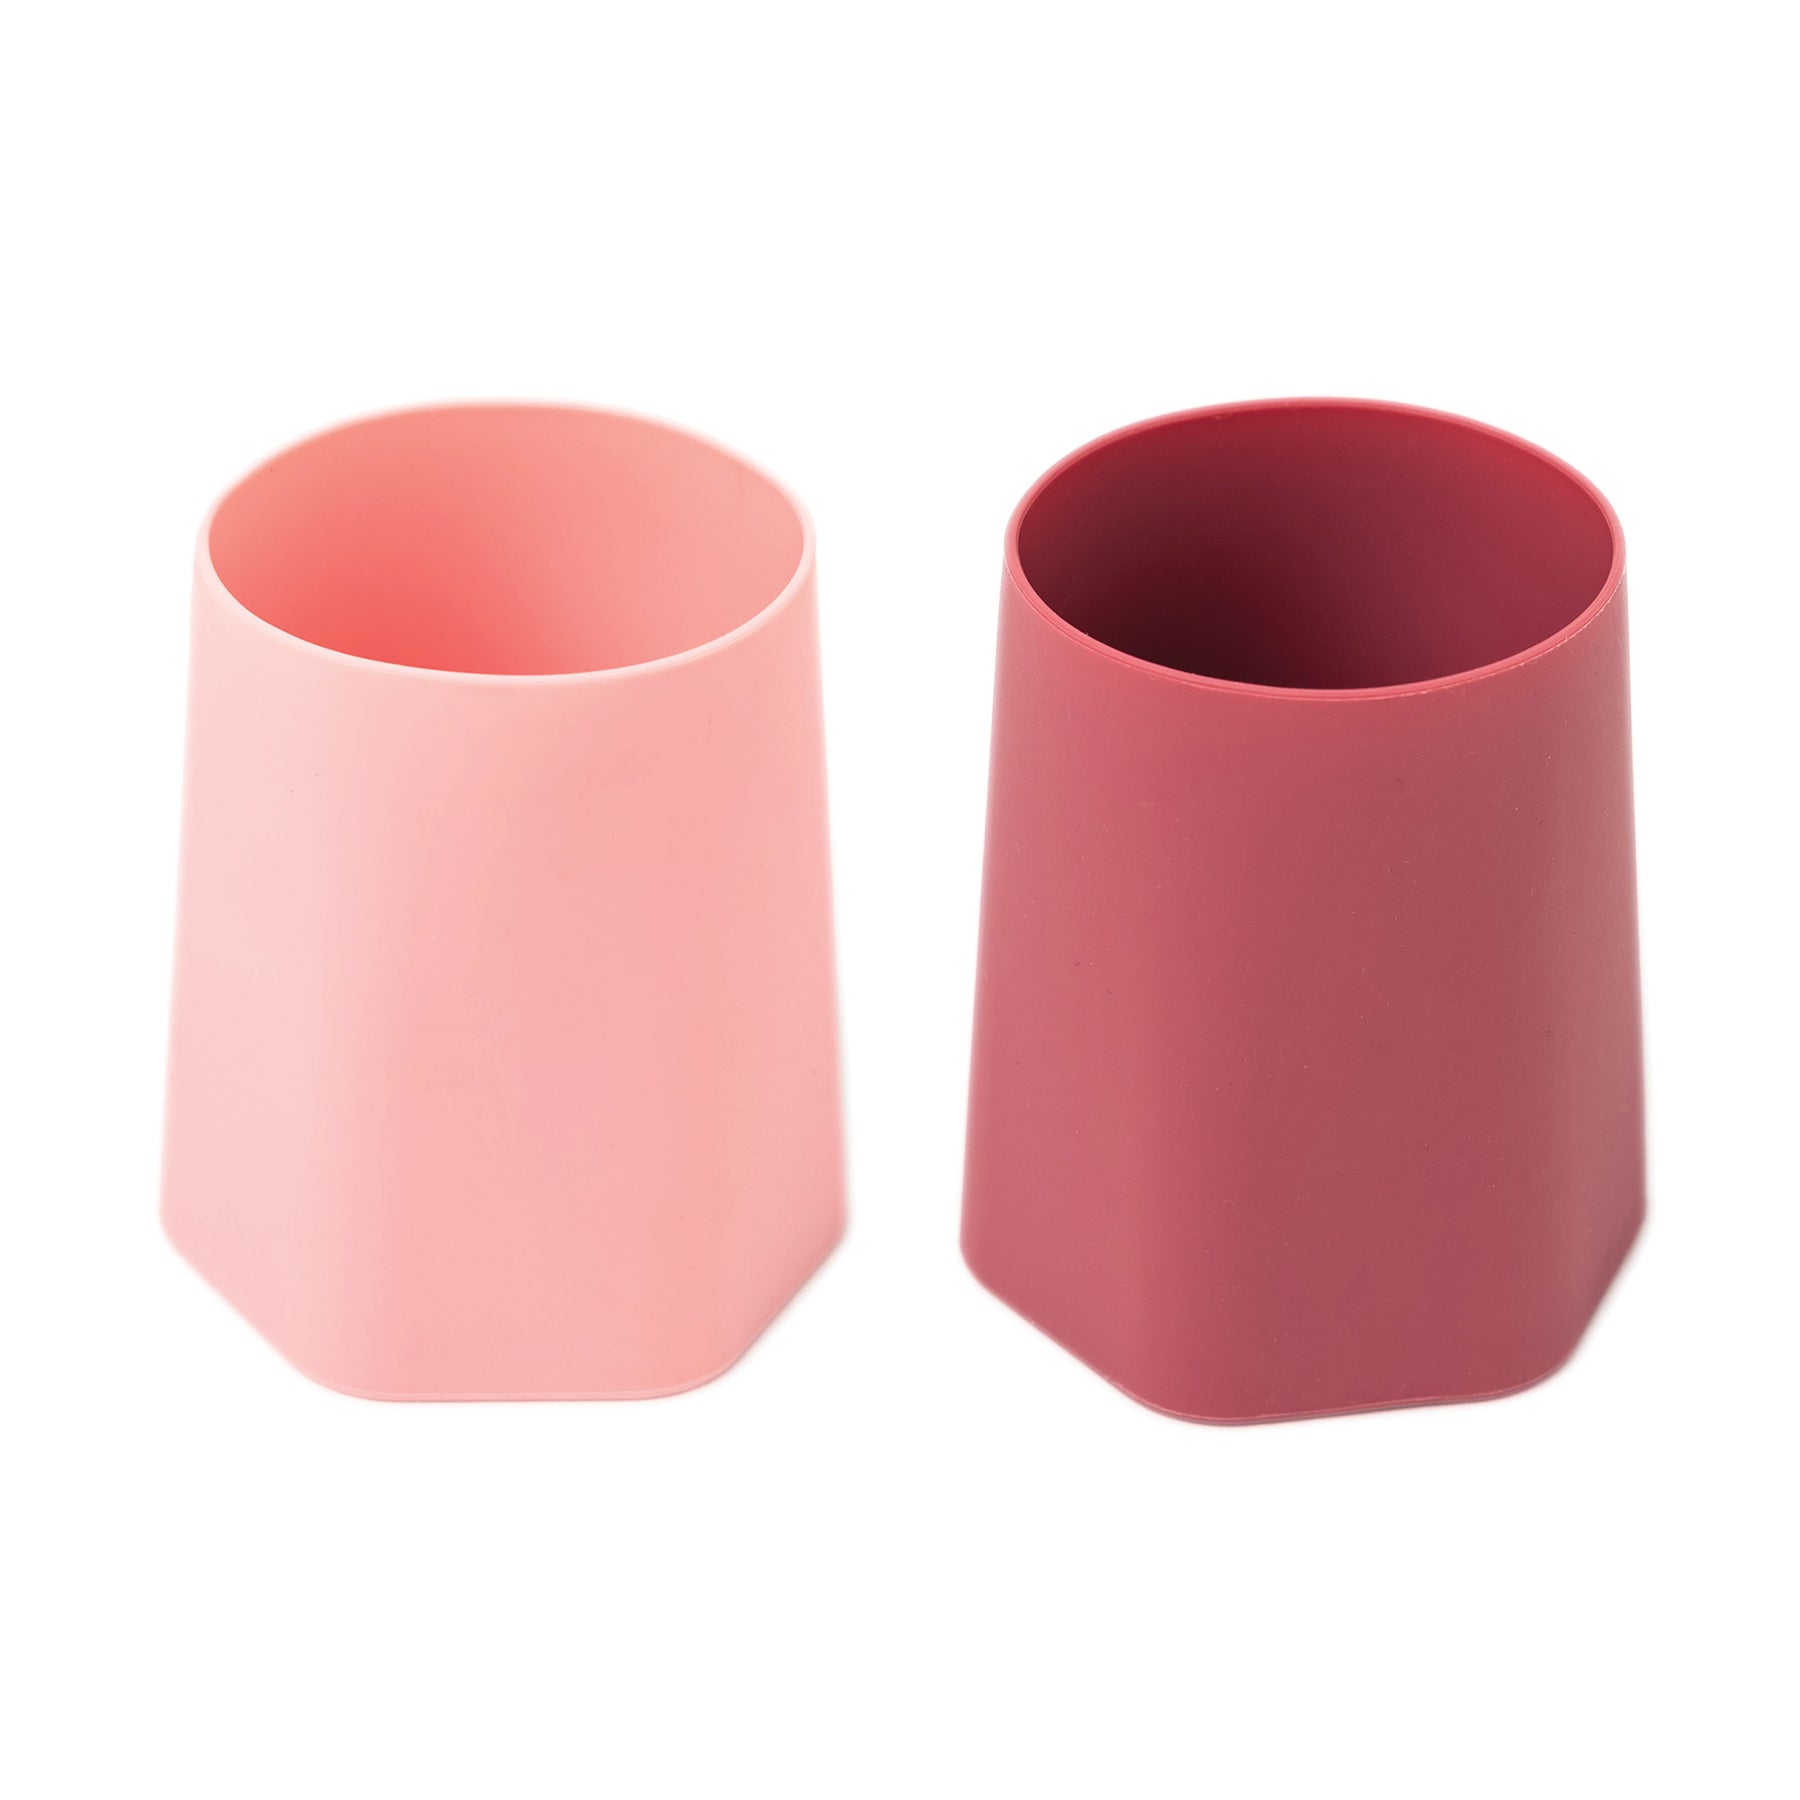 Tiny Twinkle Silicone Training Cups | 2pk | Rose & Burgundy